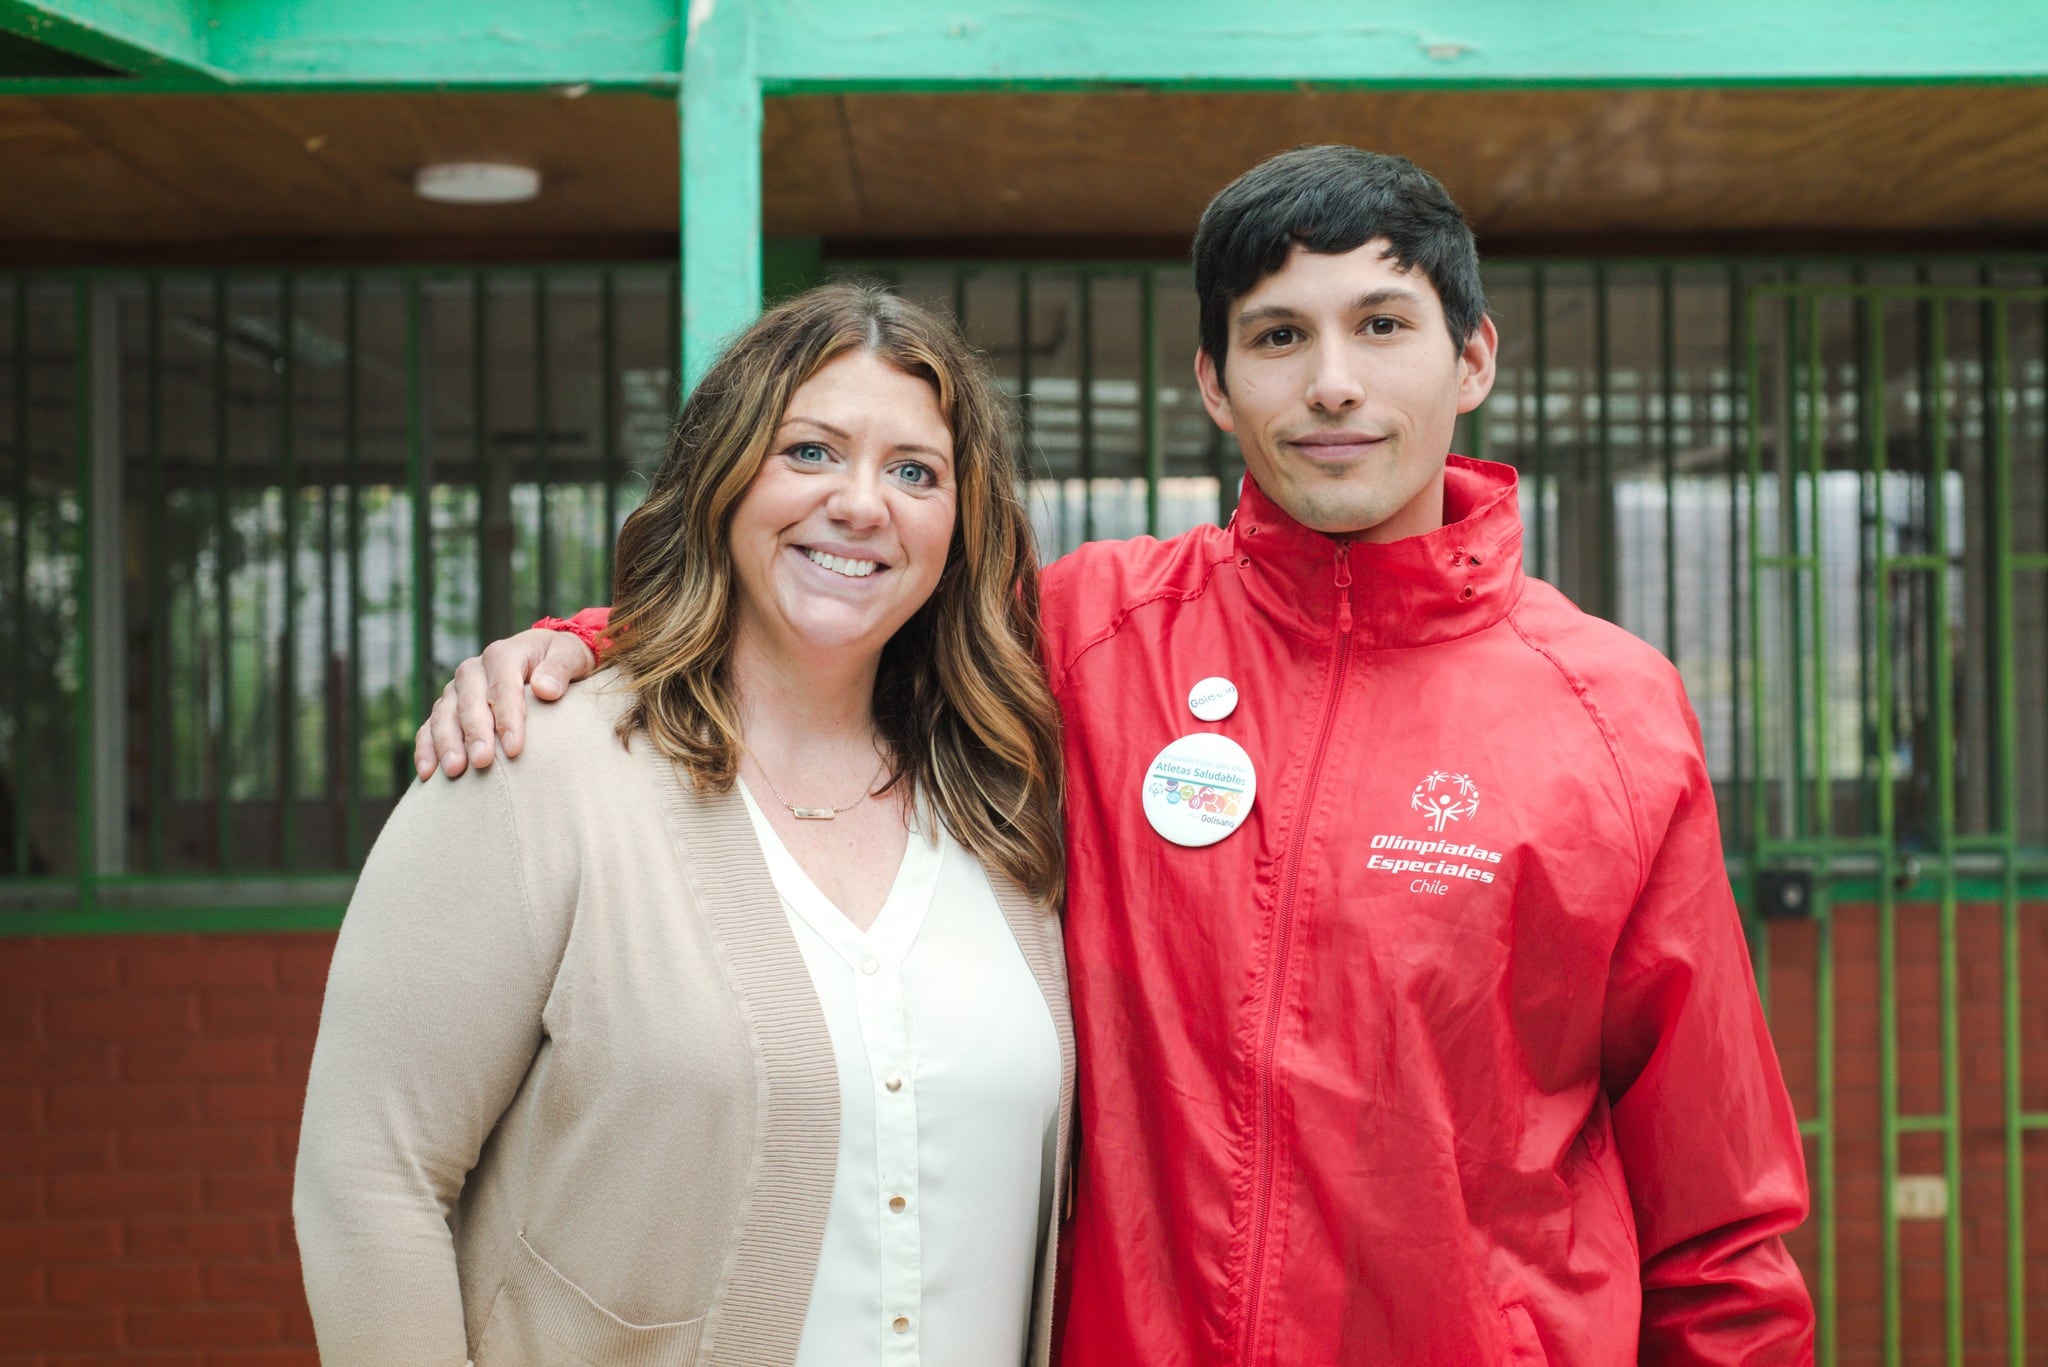 Foundation Director Erica Dayton posed for a photo with Gonzalo Escobar in Chile